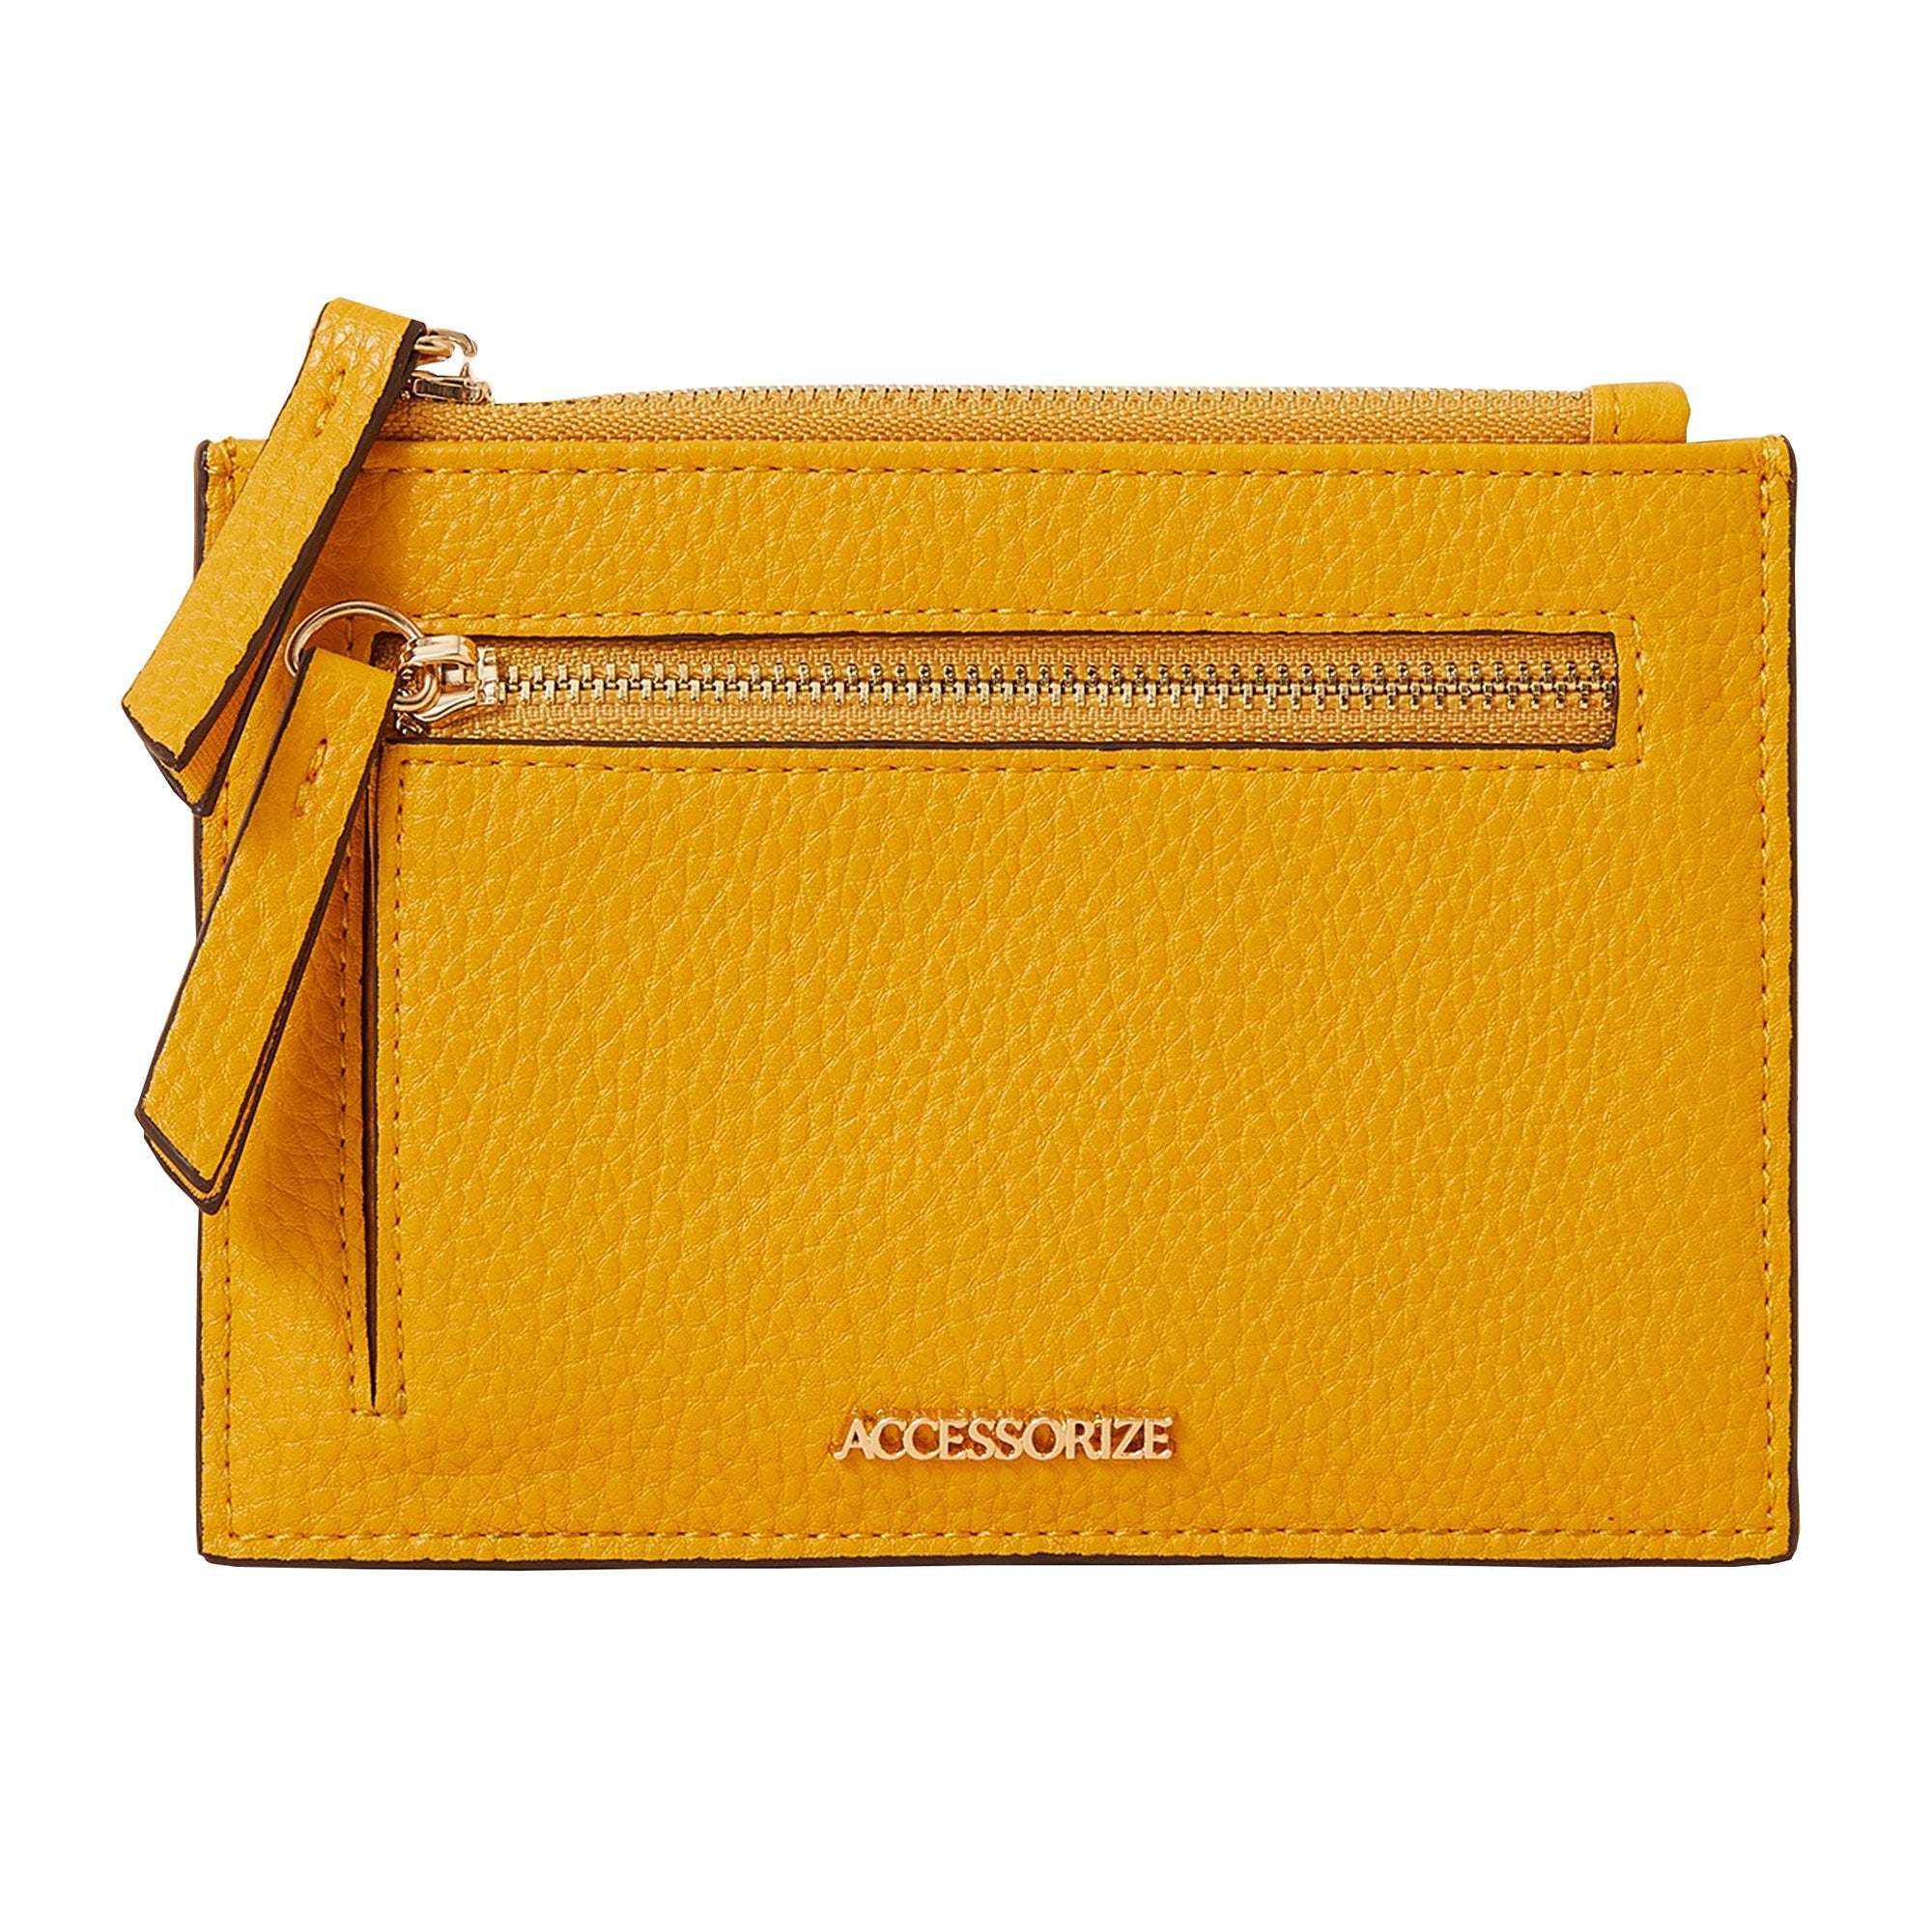 Accessorize London Women'S Faux Leather Yellow Large Functional Cardholder